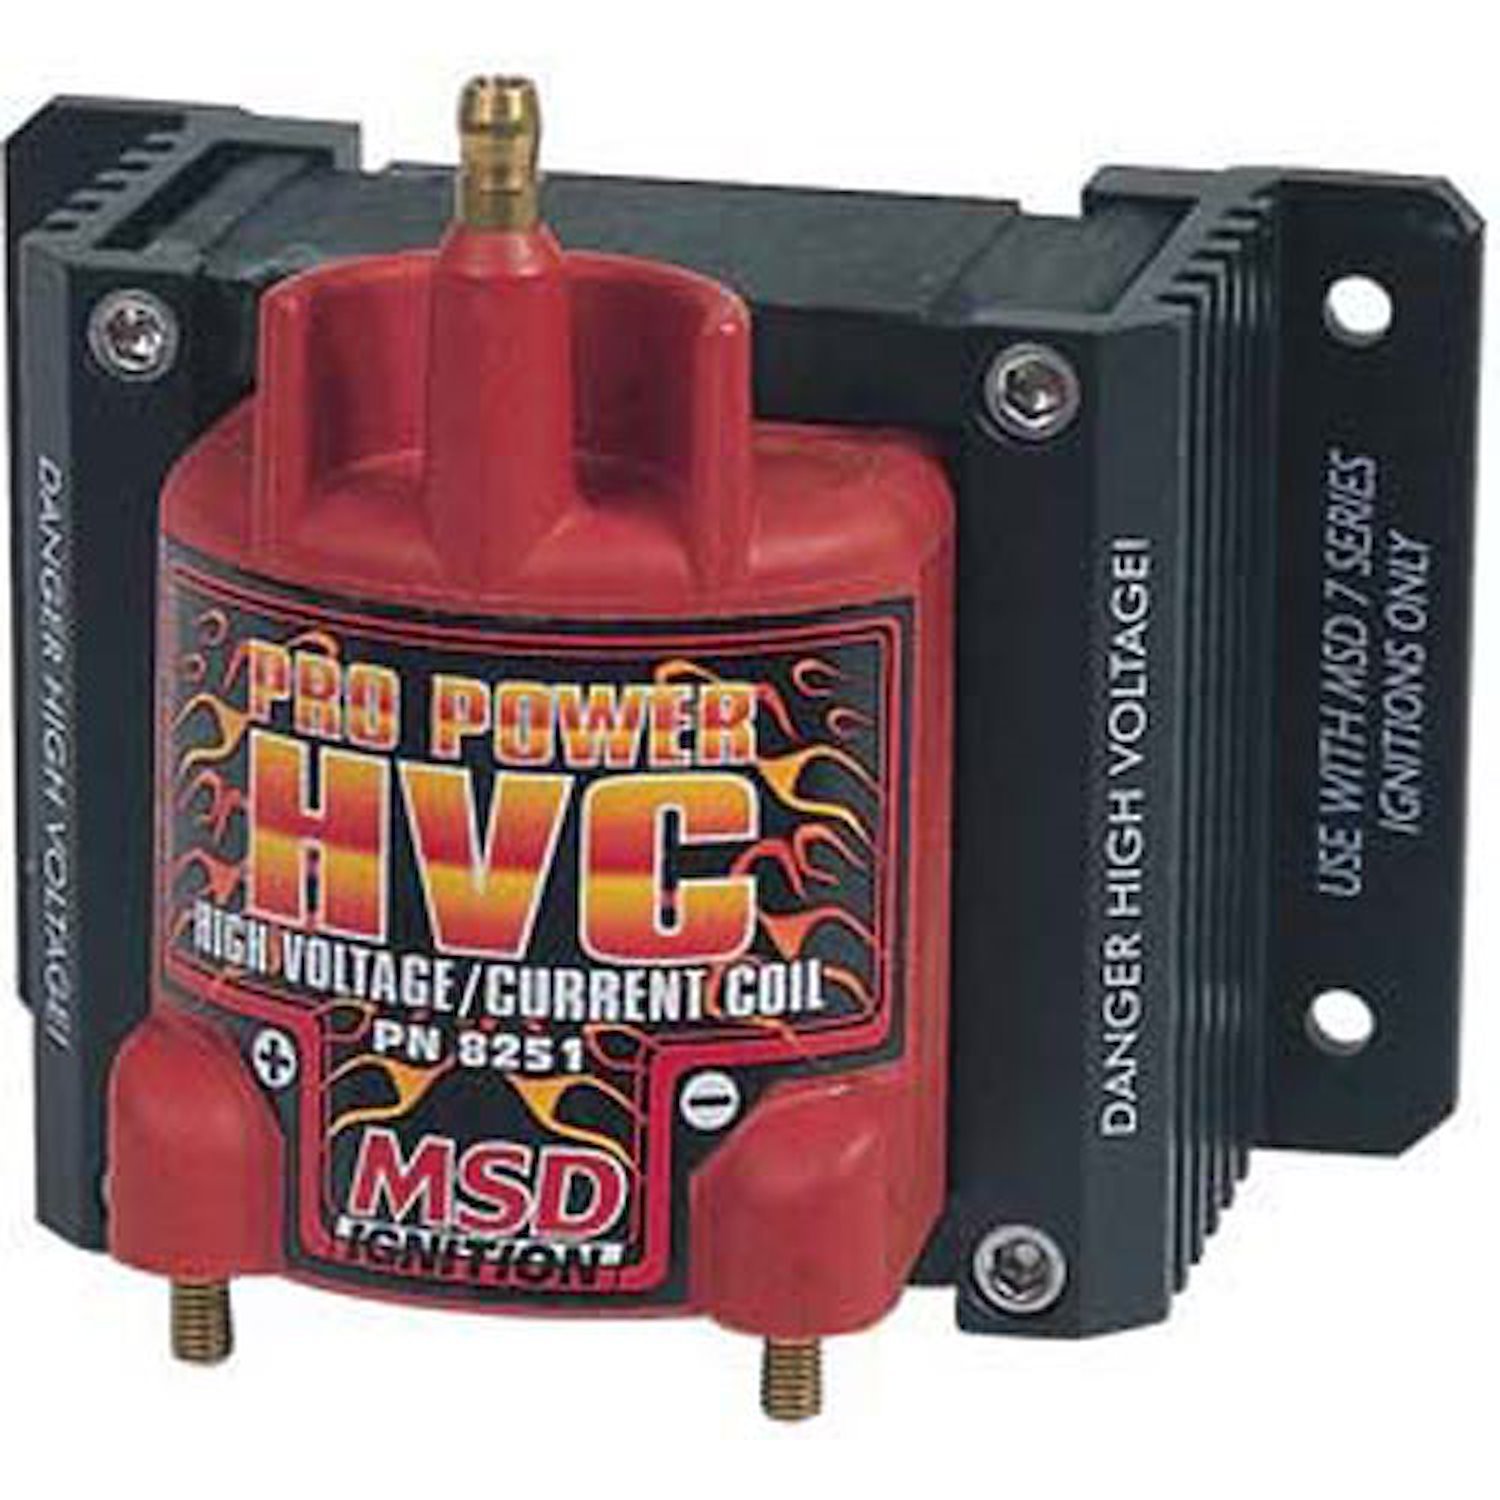 Pro Power HVC Coil For Use With 7